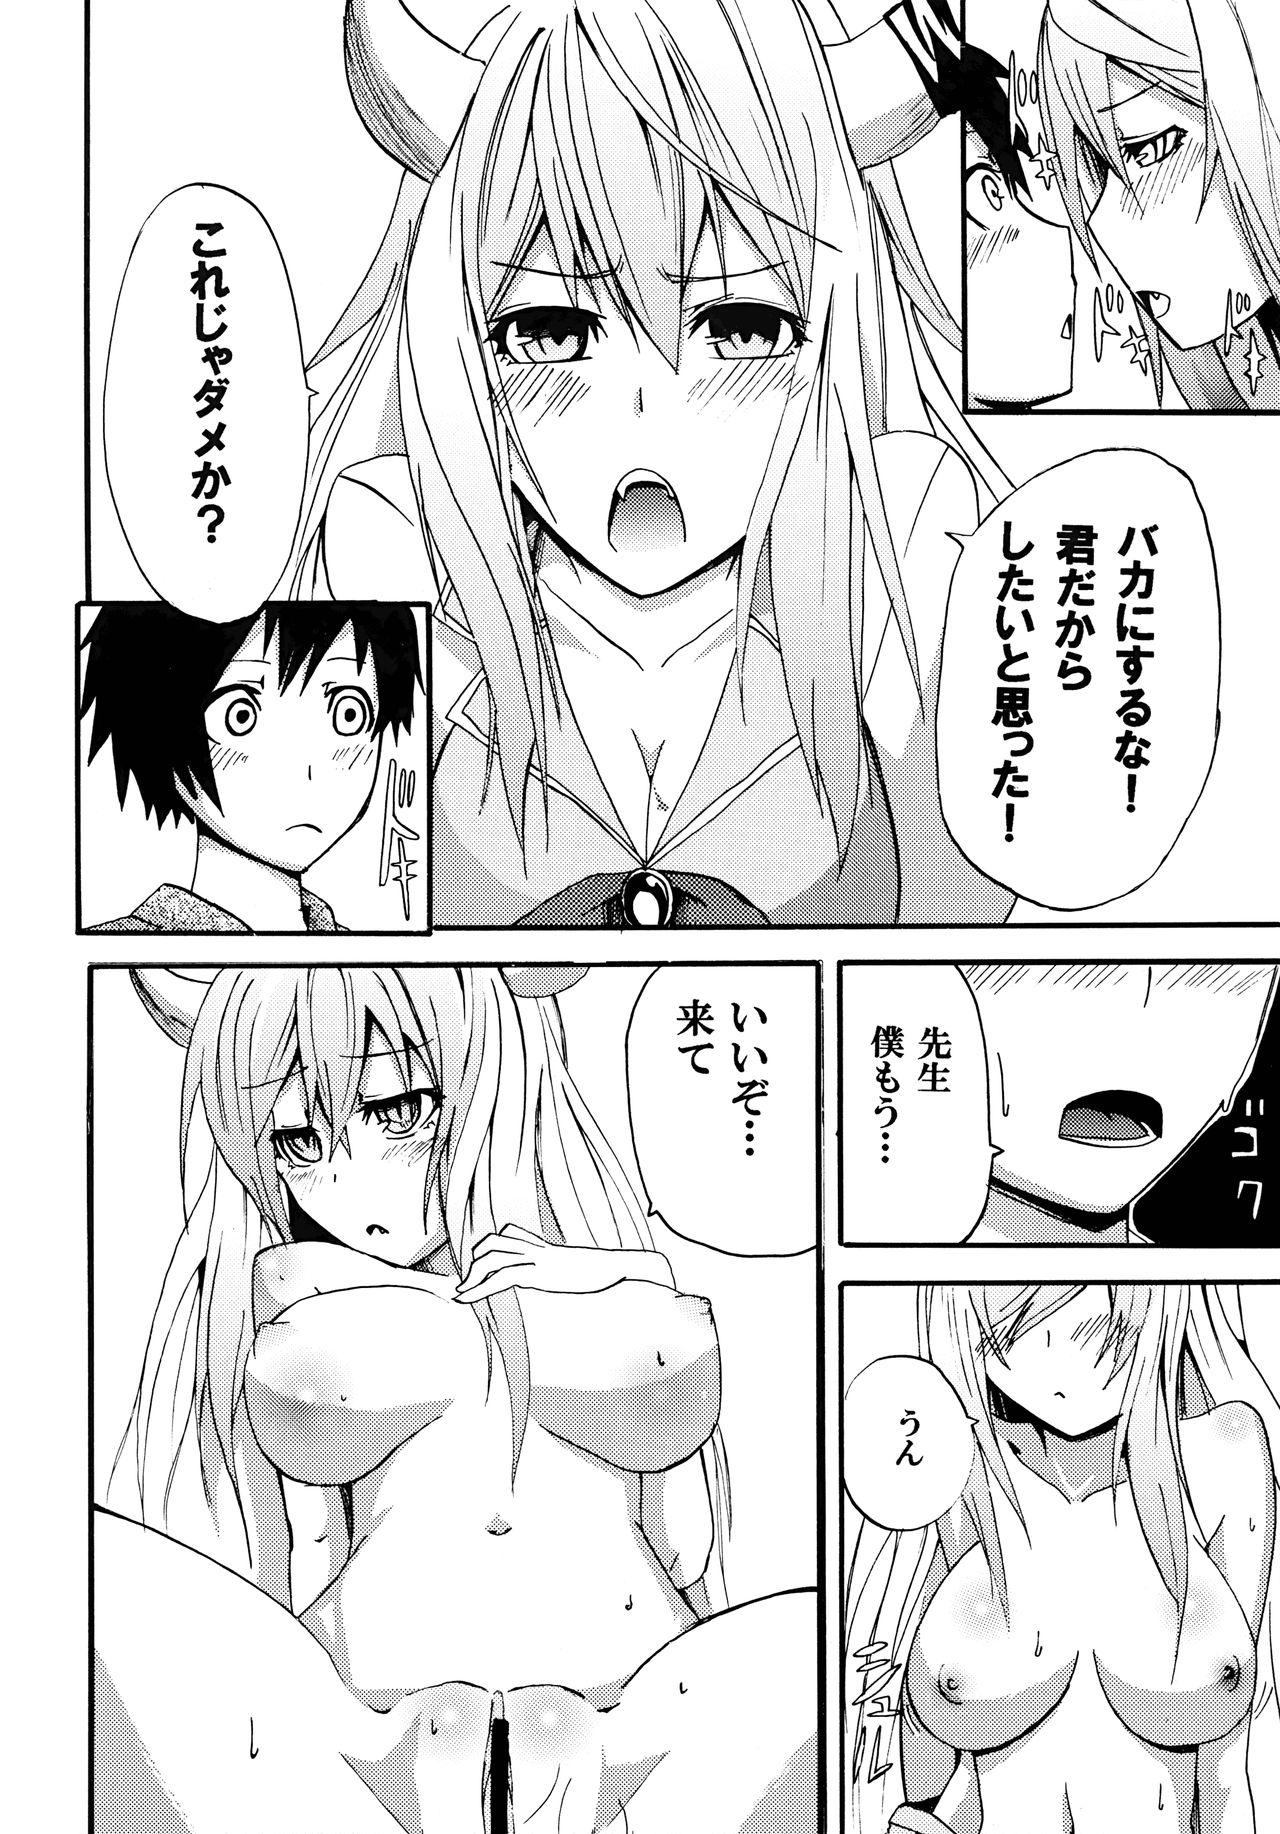 Hot Girl (C77) [INNOCENT CHAPEL (Various)] toho-ryu-i-so (Touhou Project) - Touhou project Family Taboo - Page 7